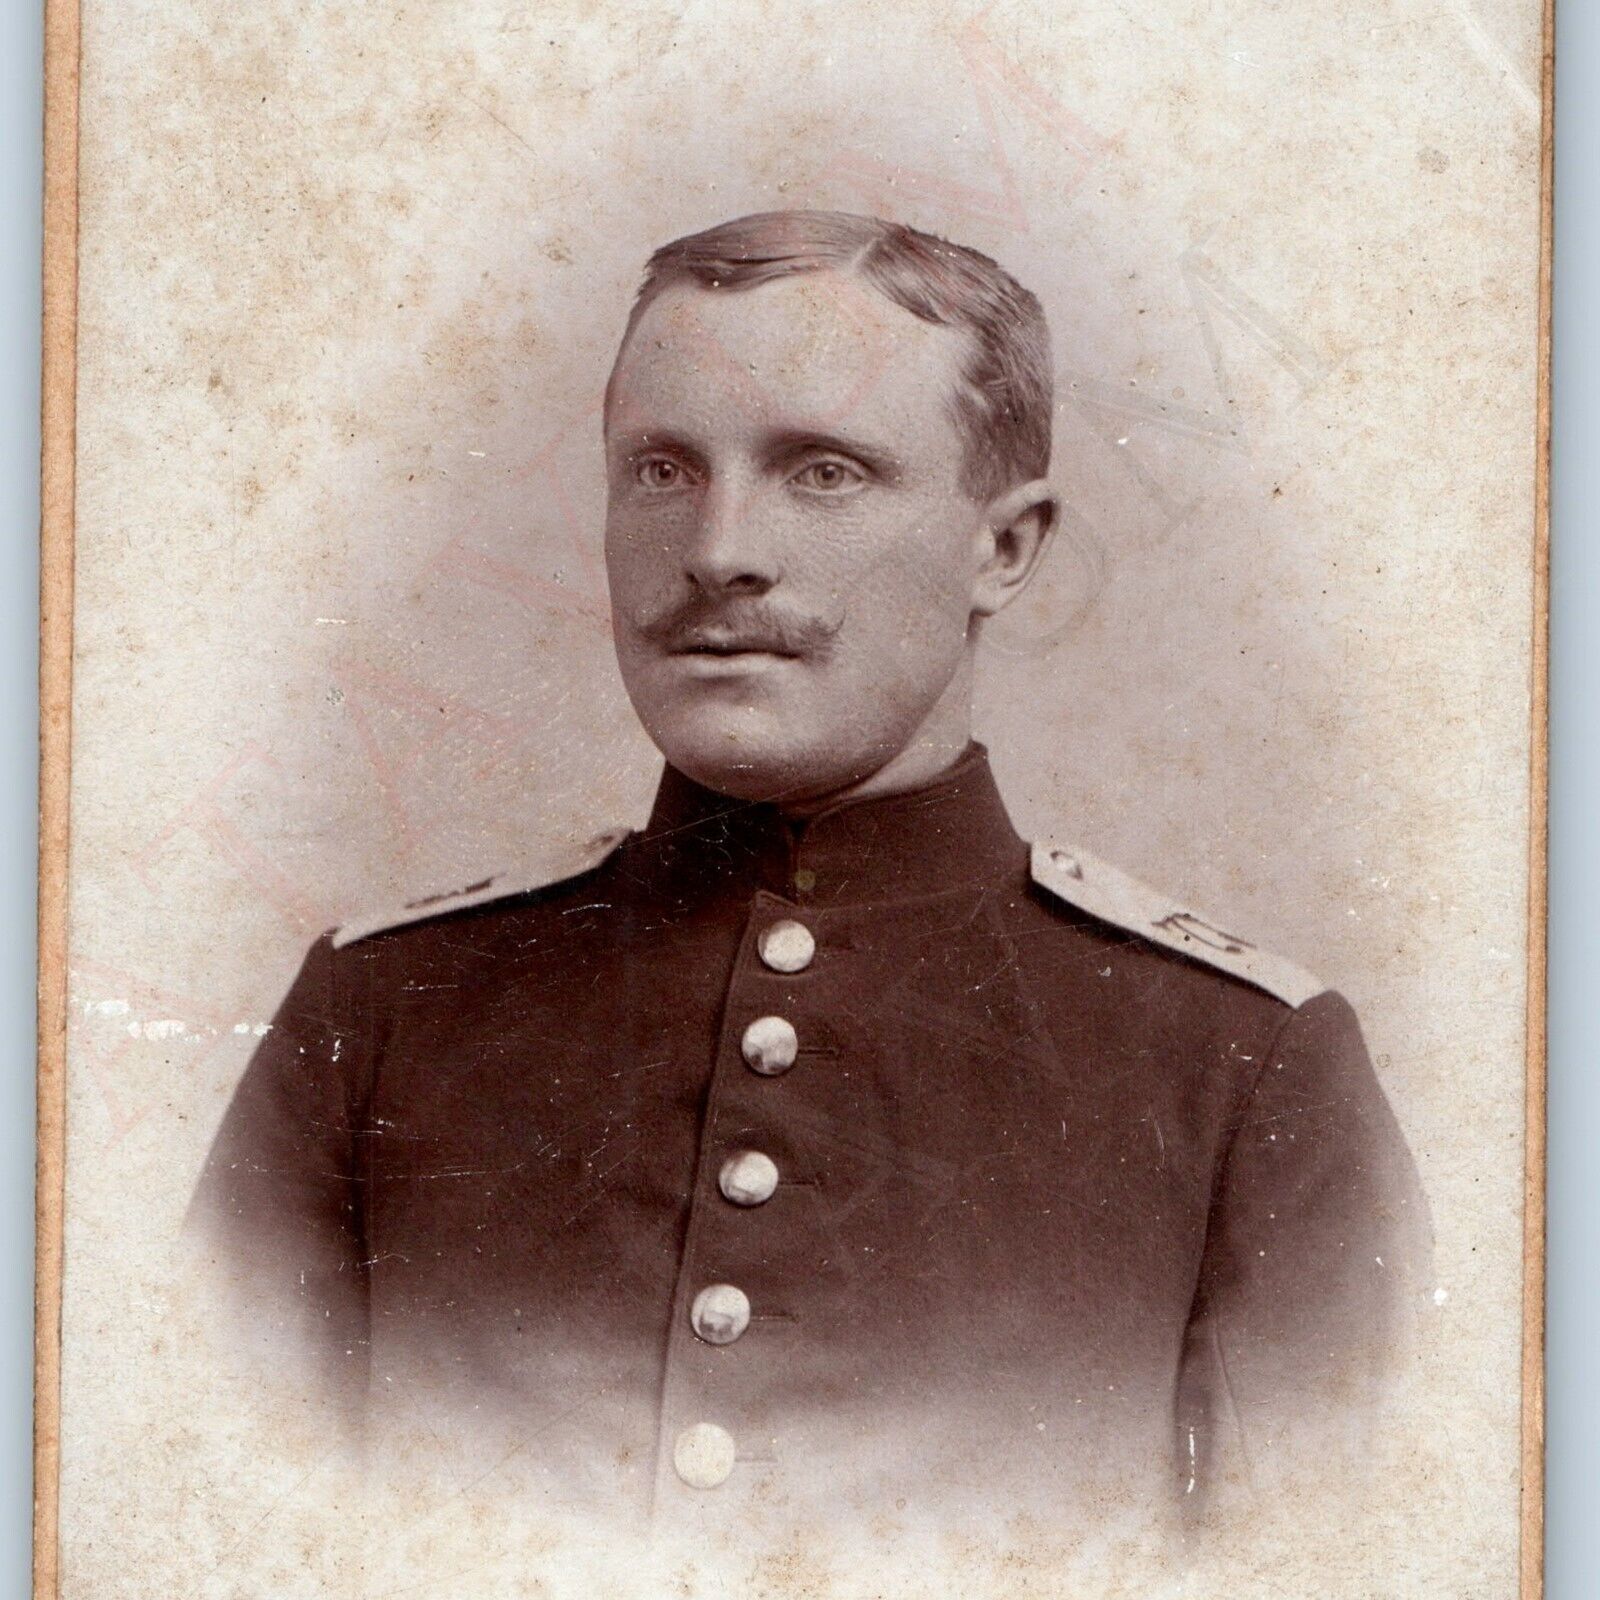 c1870s Hannover-Linden, Germany Military Man CdV Uniform Photo Card Soldier H37